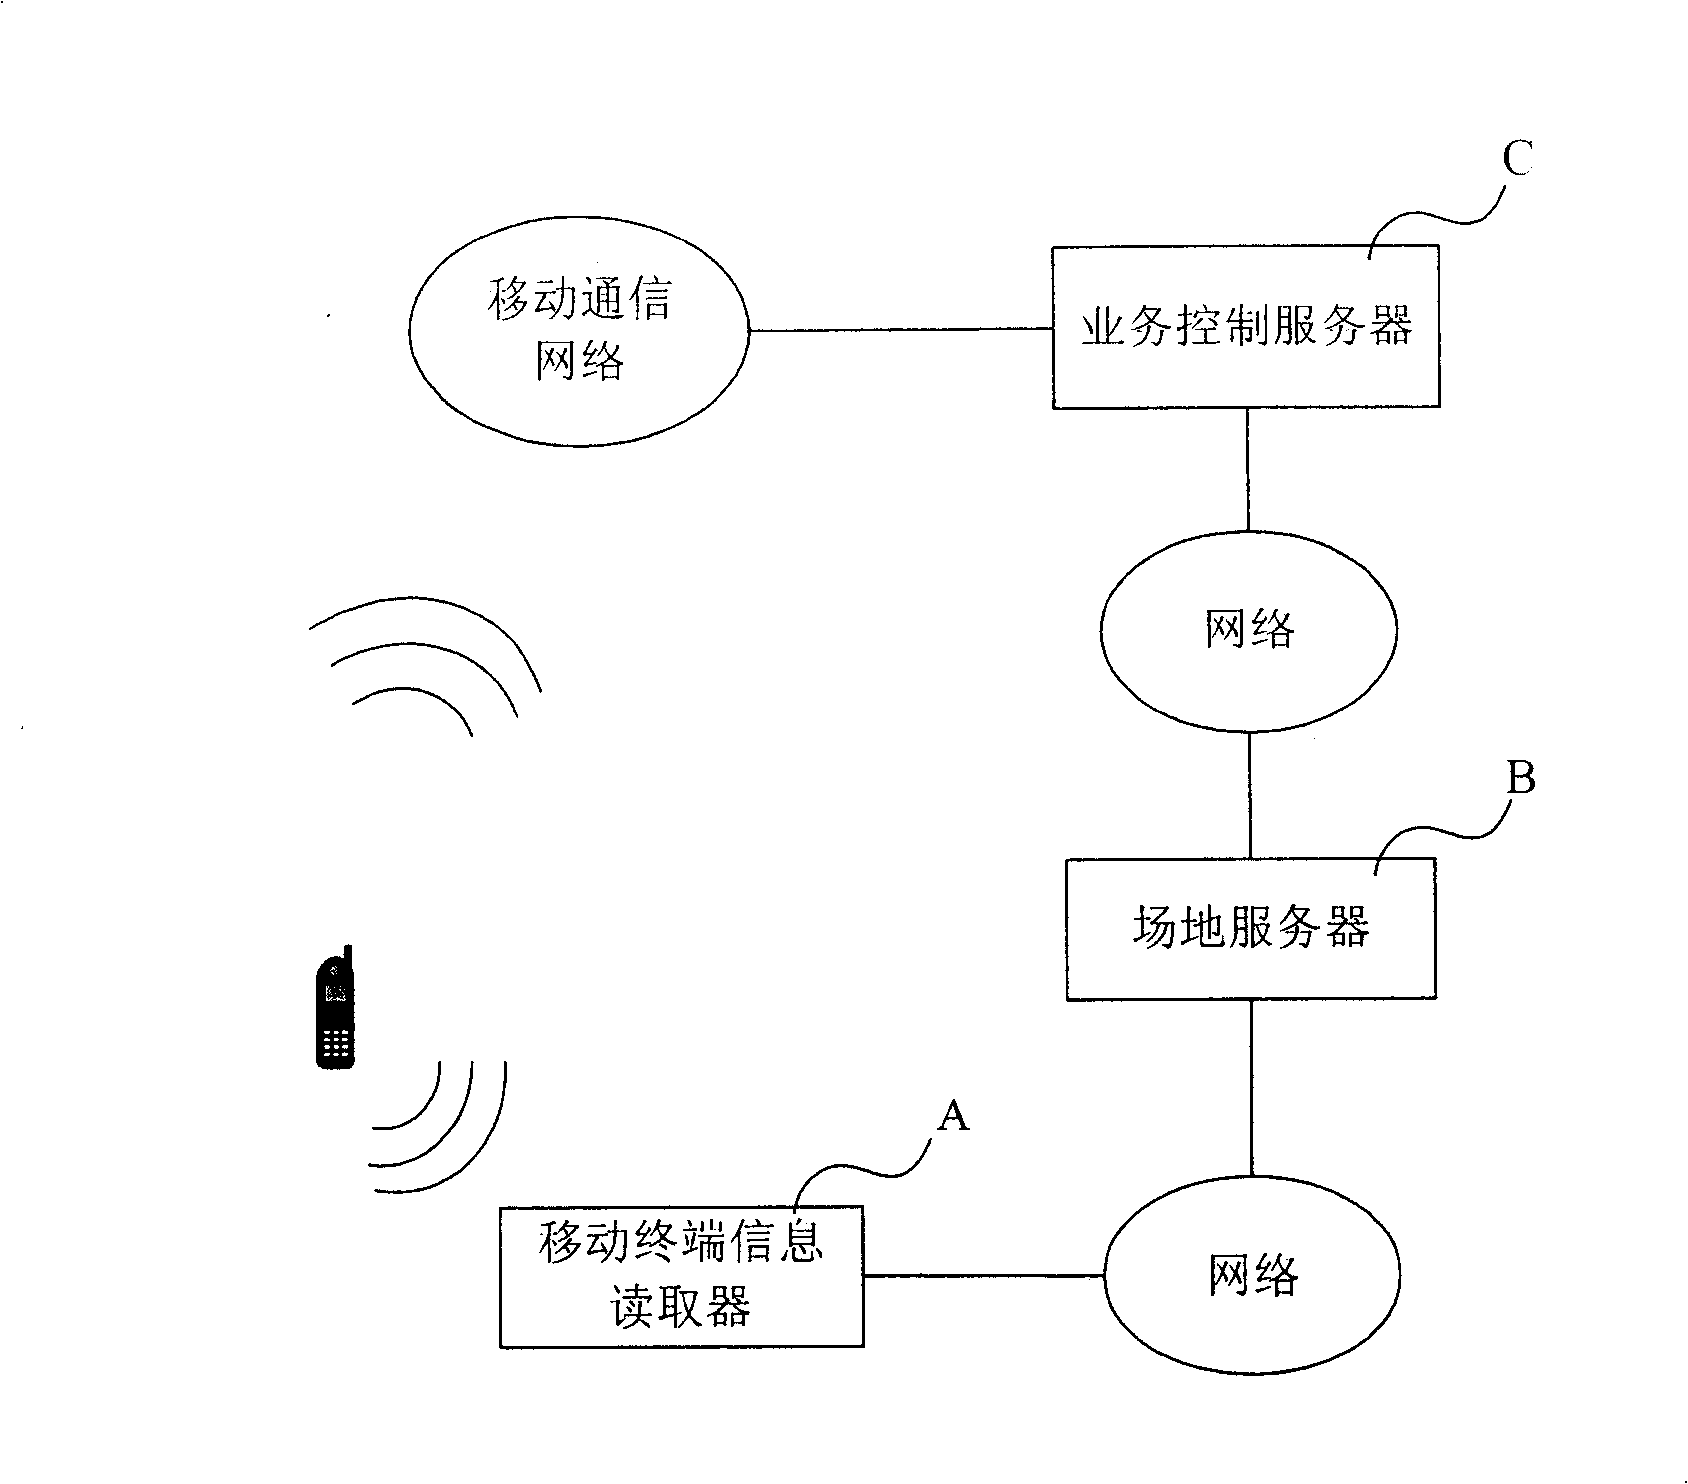 Mobile terminal service function control system and control method